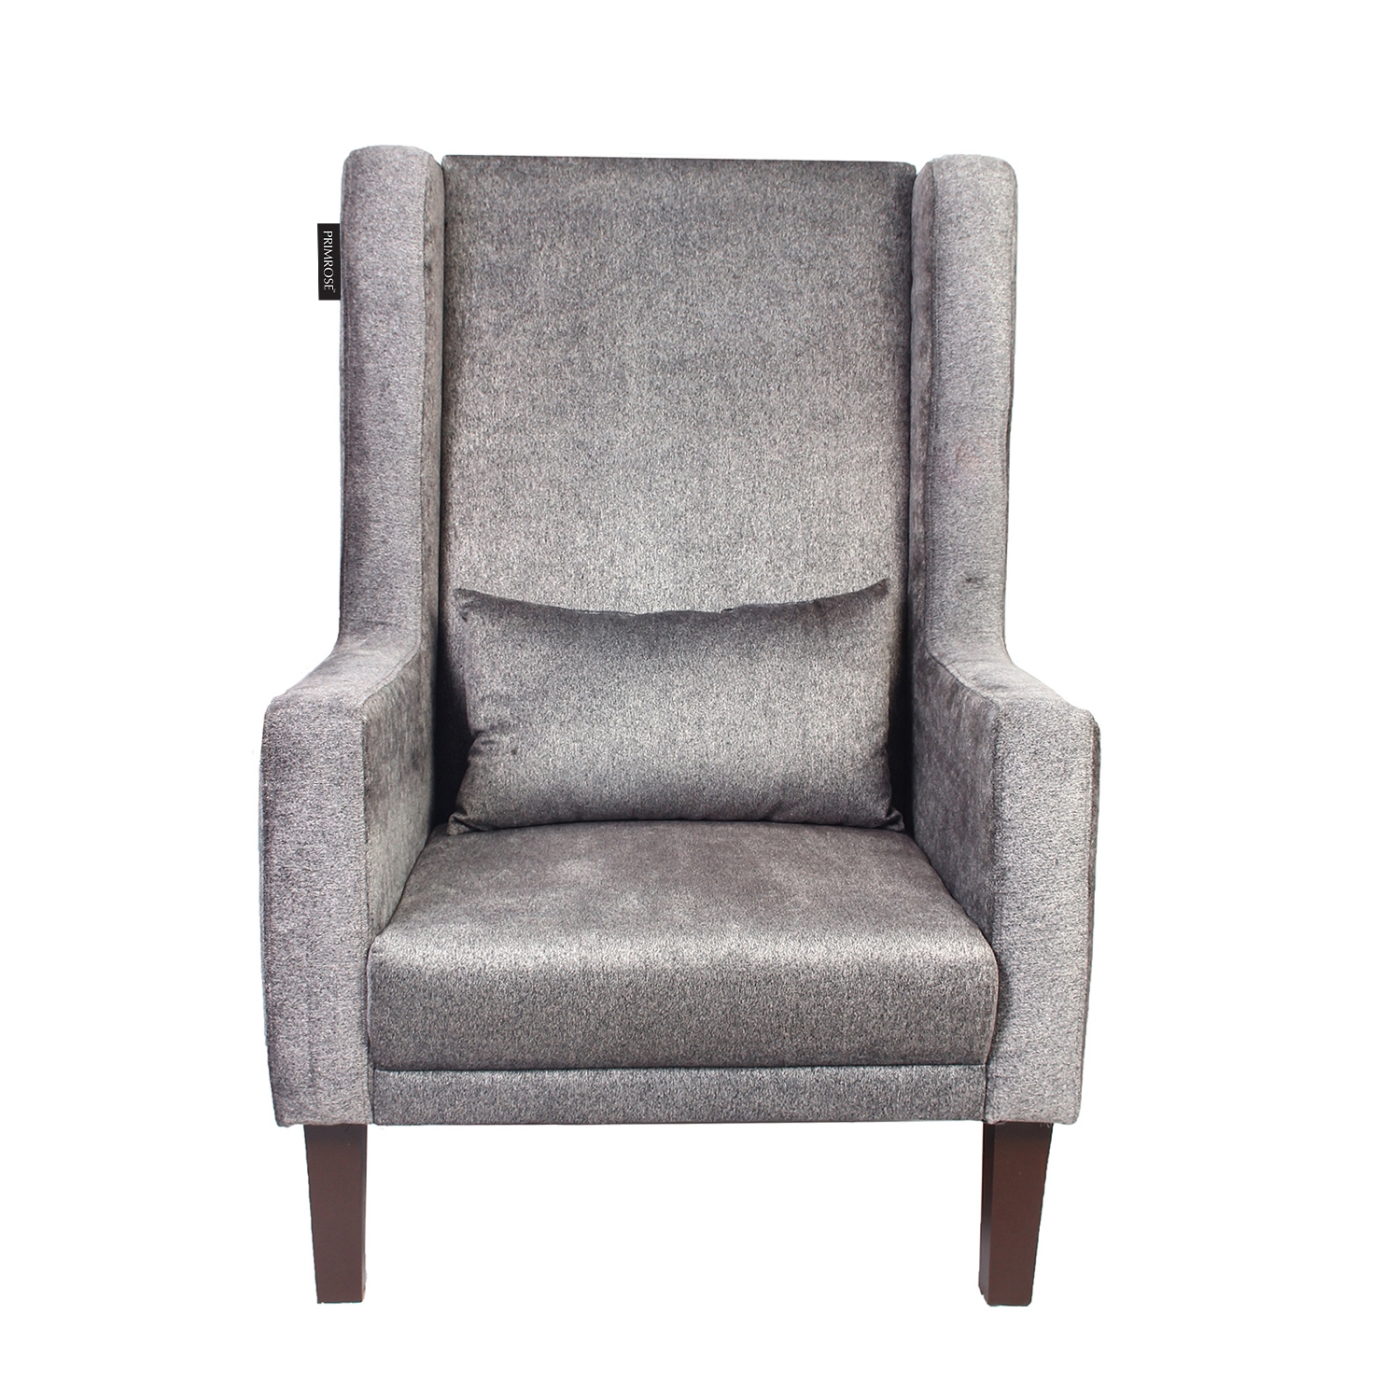 PRIMROSE Chicago High Back Polyester Fabric Chair - Charcoal Grey